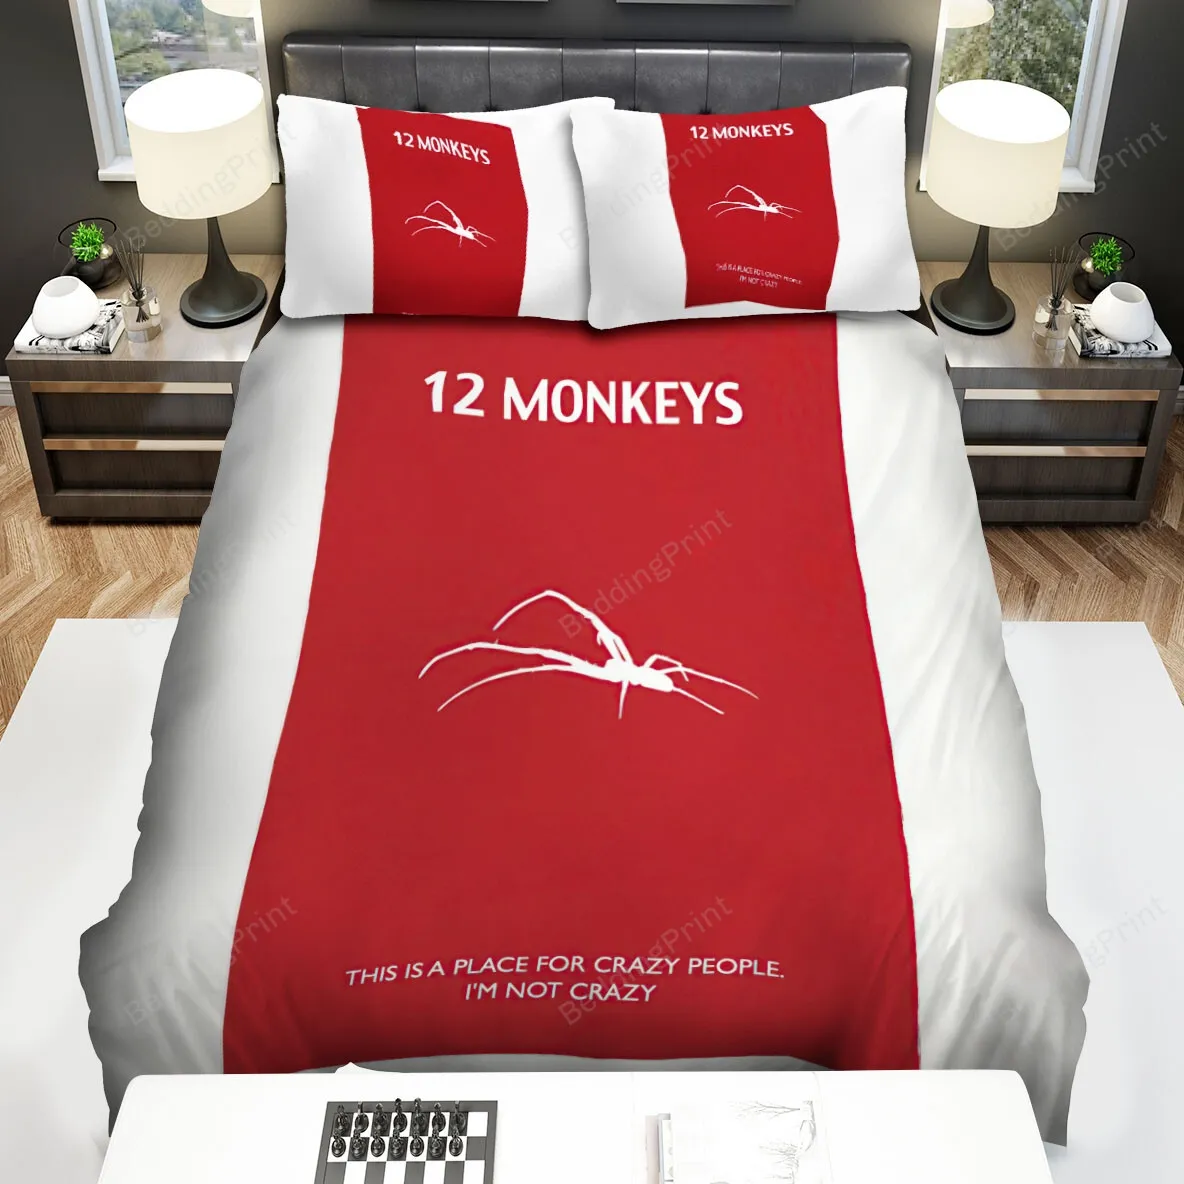 12 Monkeys (20152018) This Is A Place Forr Crazy People Movie Poster Bed Sheets Spread Comforter Duvet Cover Bedding Sets